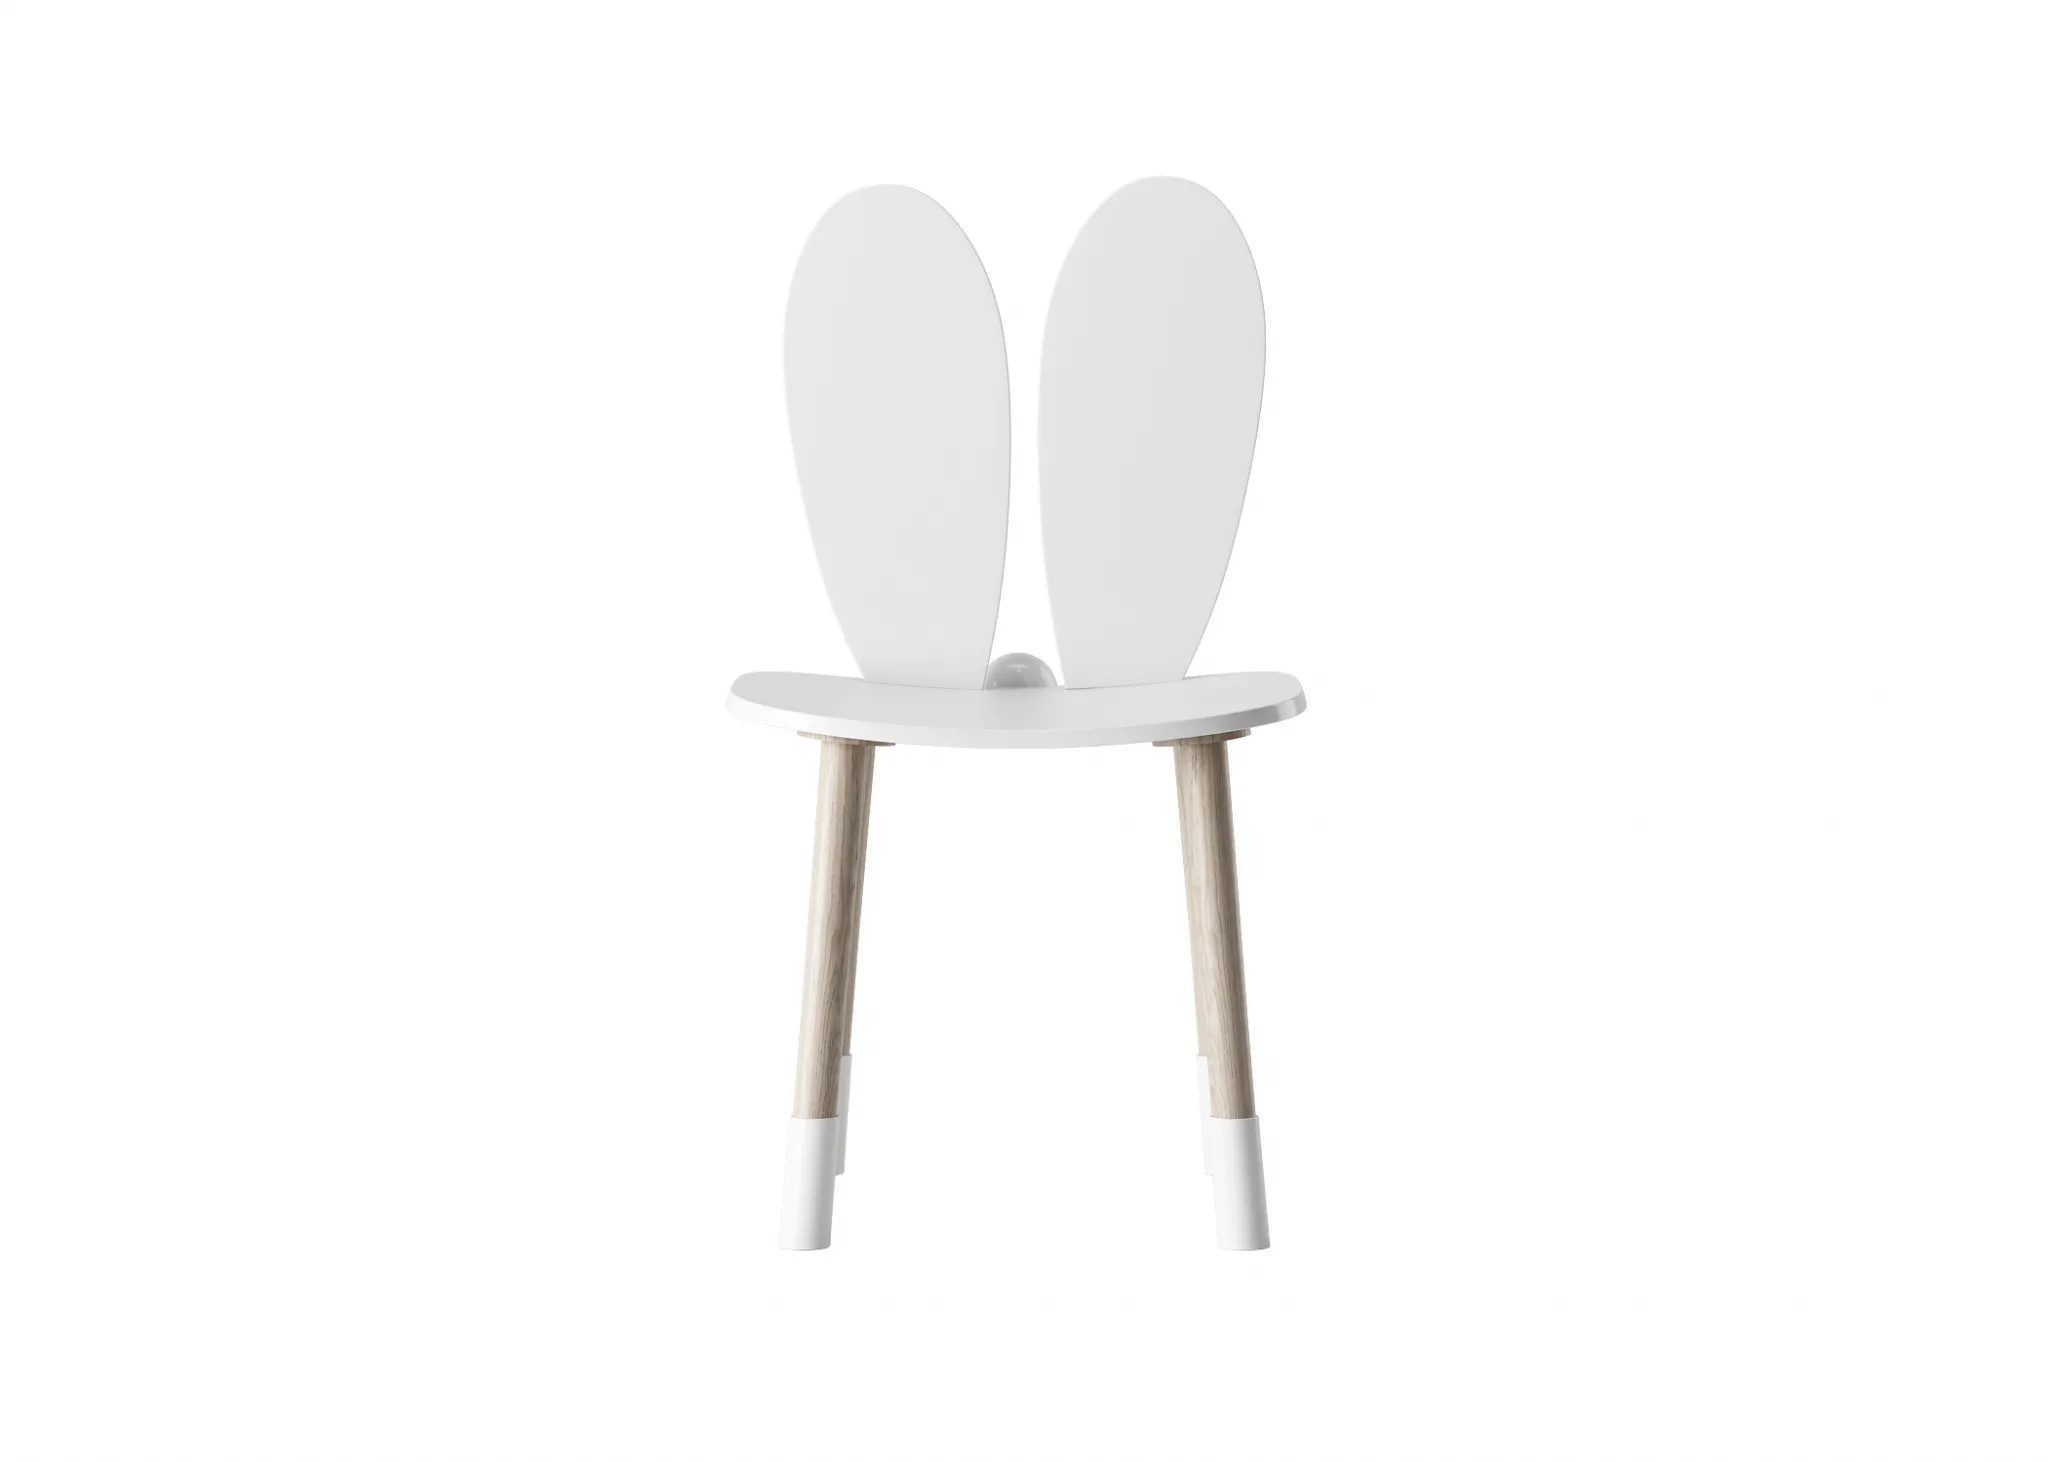 FURNITURE 3D MODELS – CHAIRS – 0355